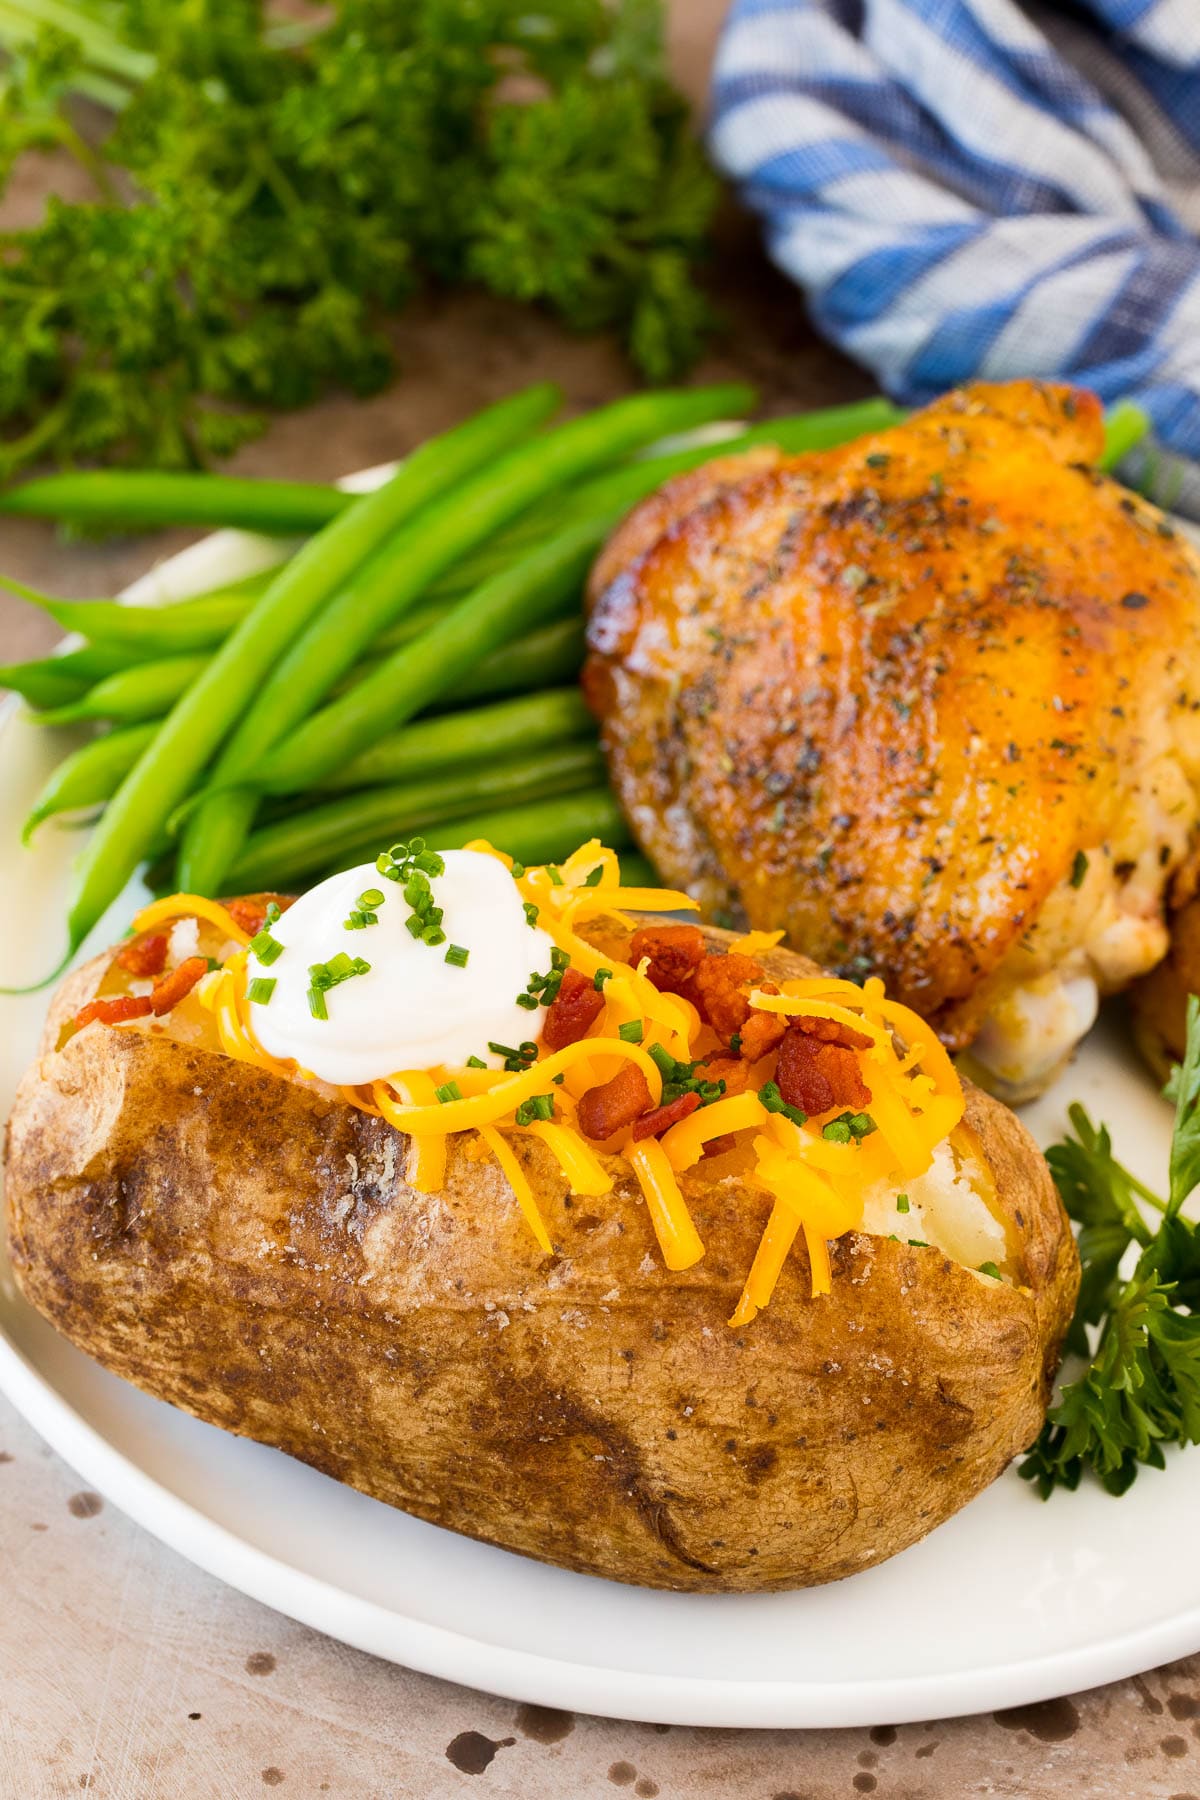 An oven baked potato served with chicken and green beans.